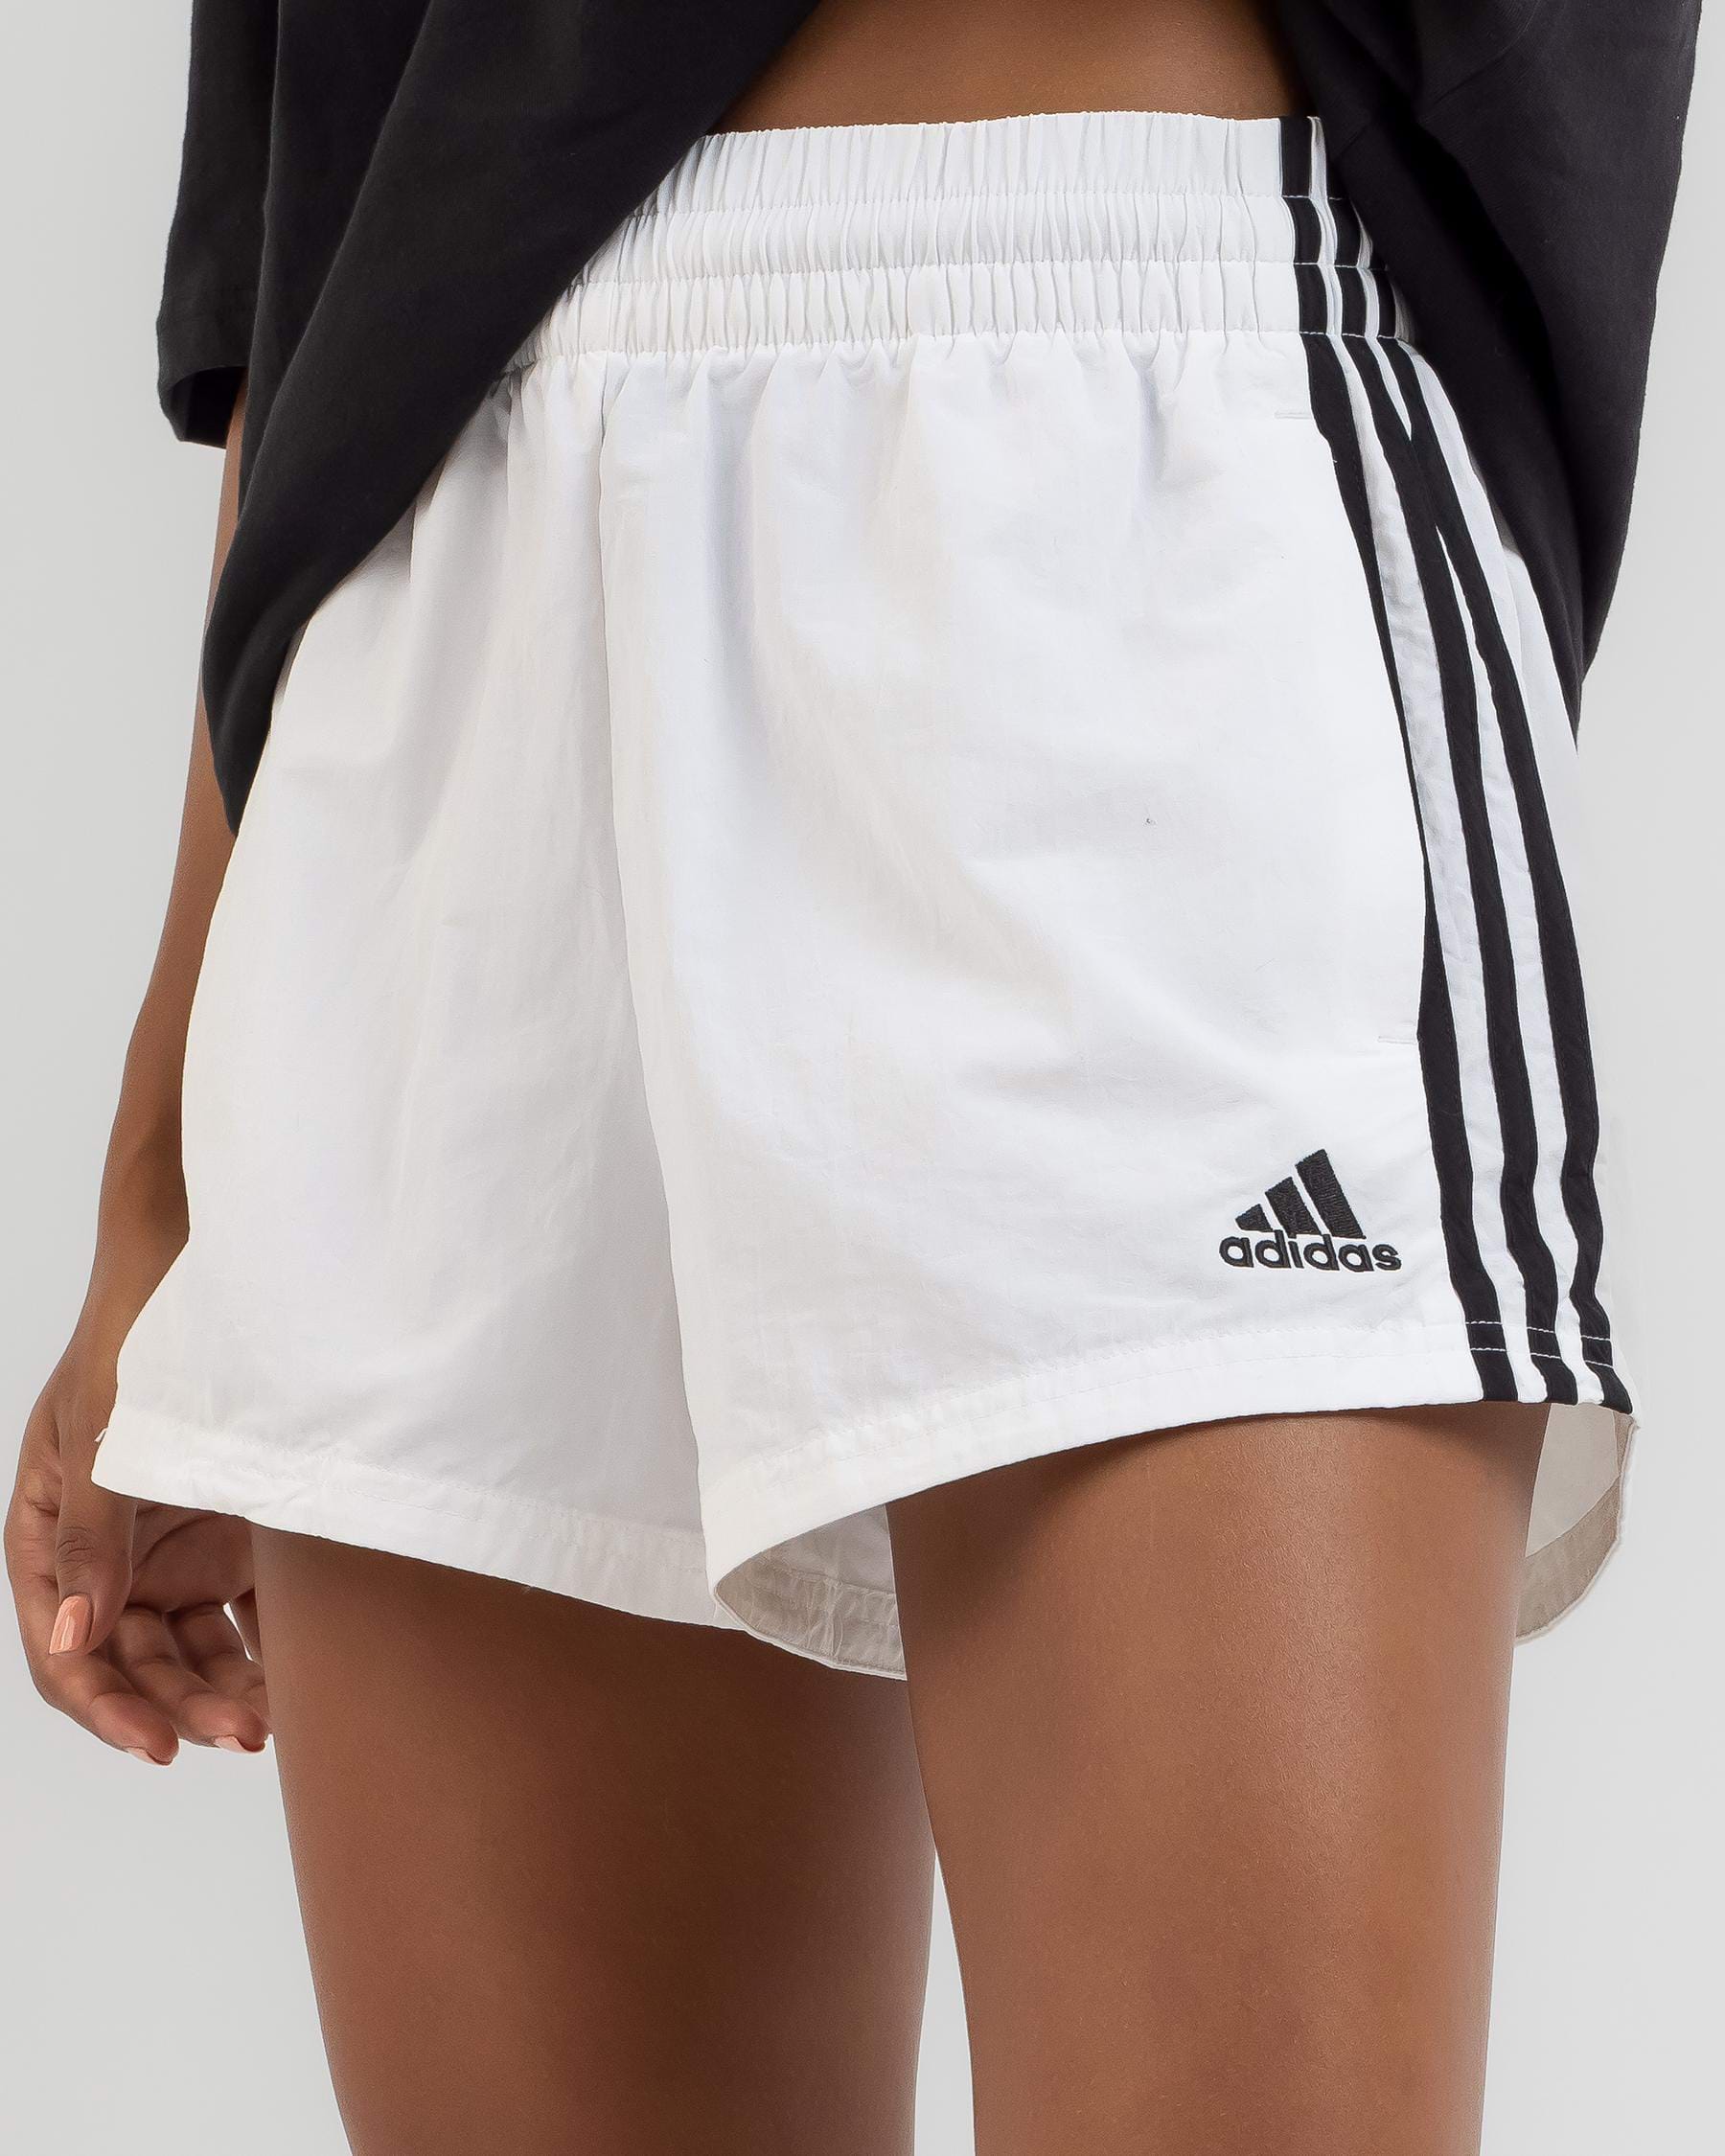 Adidas Essentials 3 Stripe FREE* Woven - In Shorts States - Returns & United White/black City Easy Beach Shipping